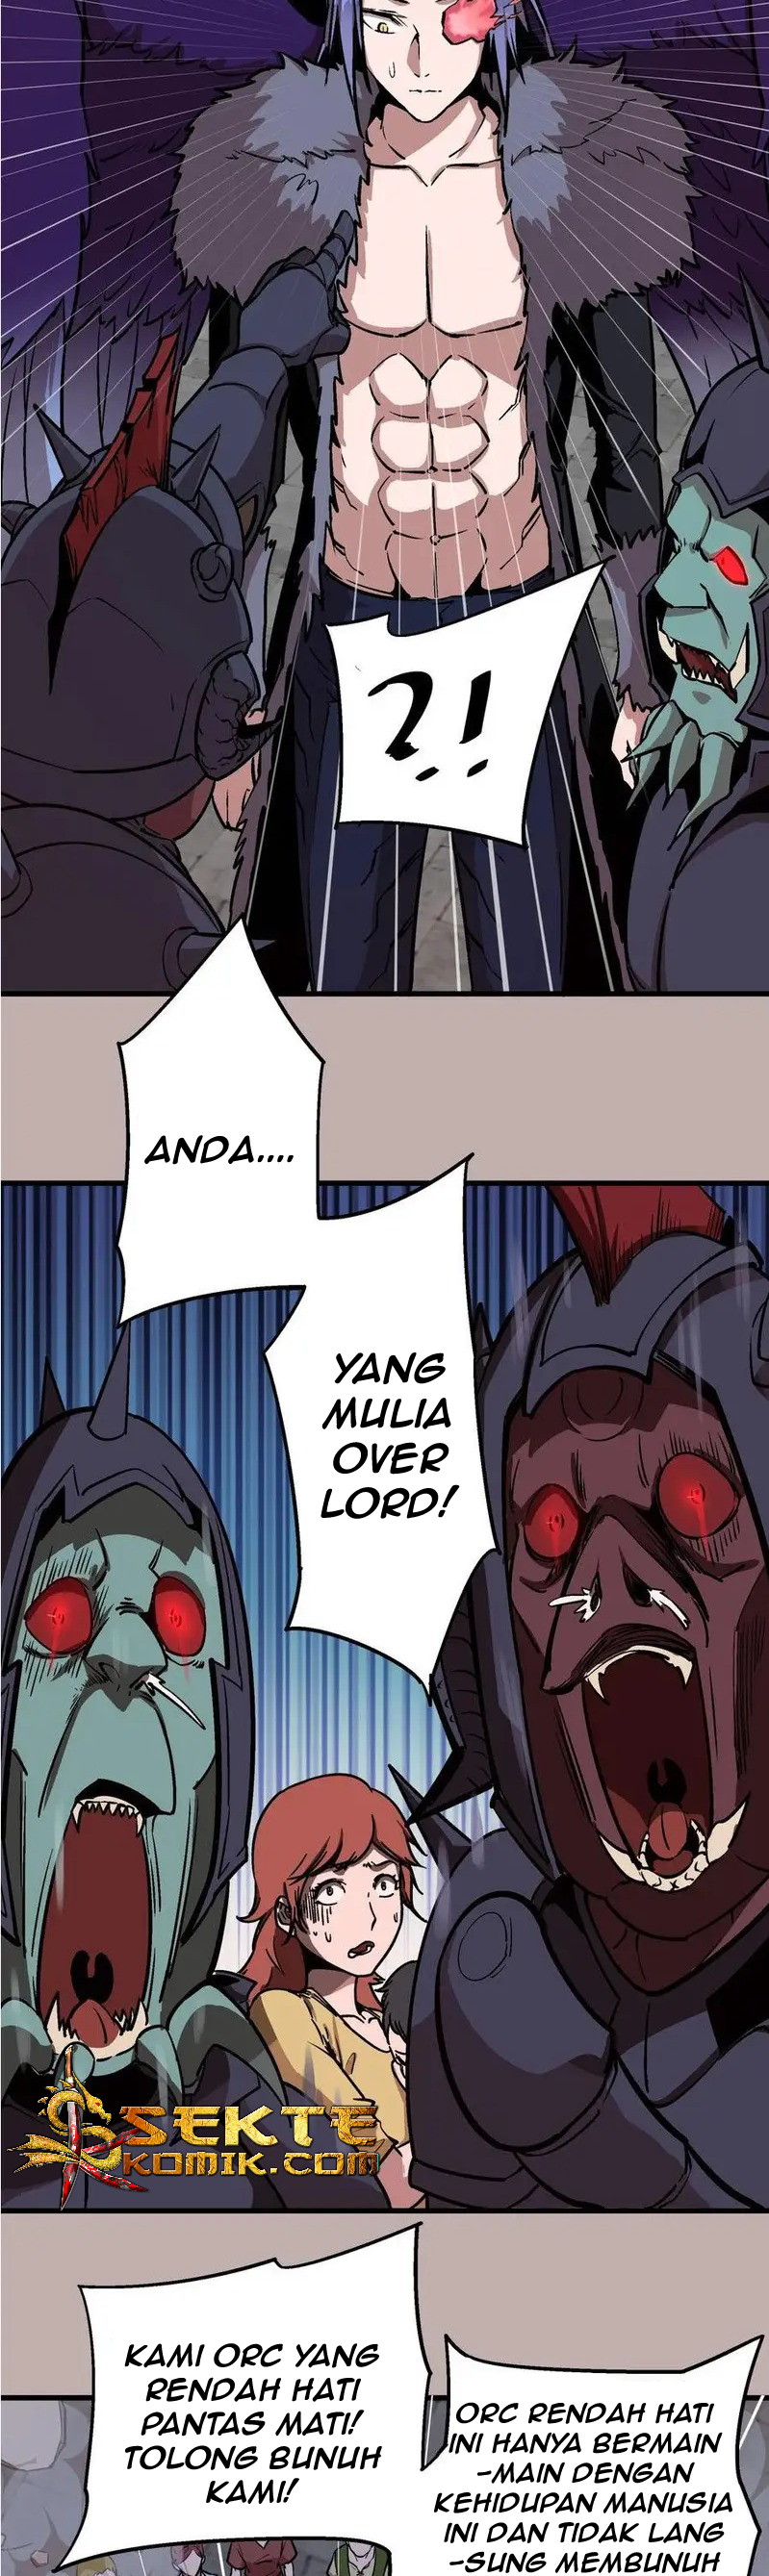 I’m Not The Overlord Chapter 2 14